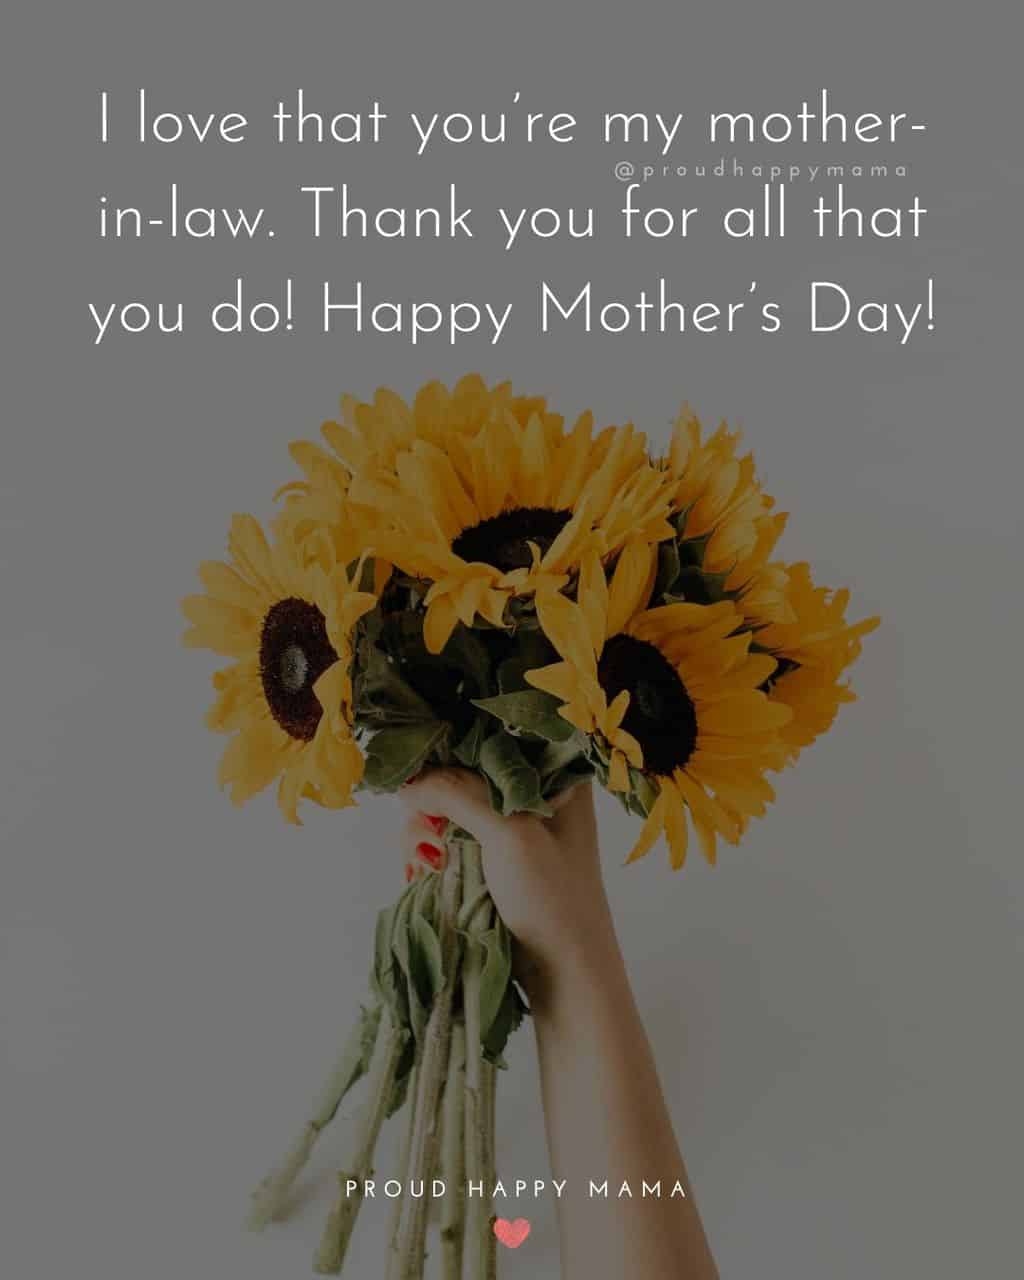 Happy Mothers Day Quotes For Mother In Law - I love that you’re my mother in law. Thank you for all that you do! Happy Mother’s Day!’